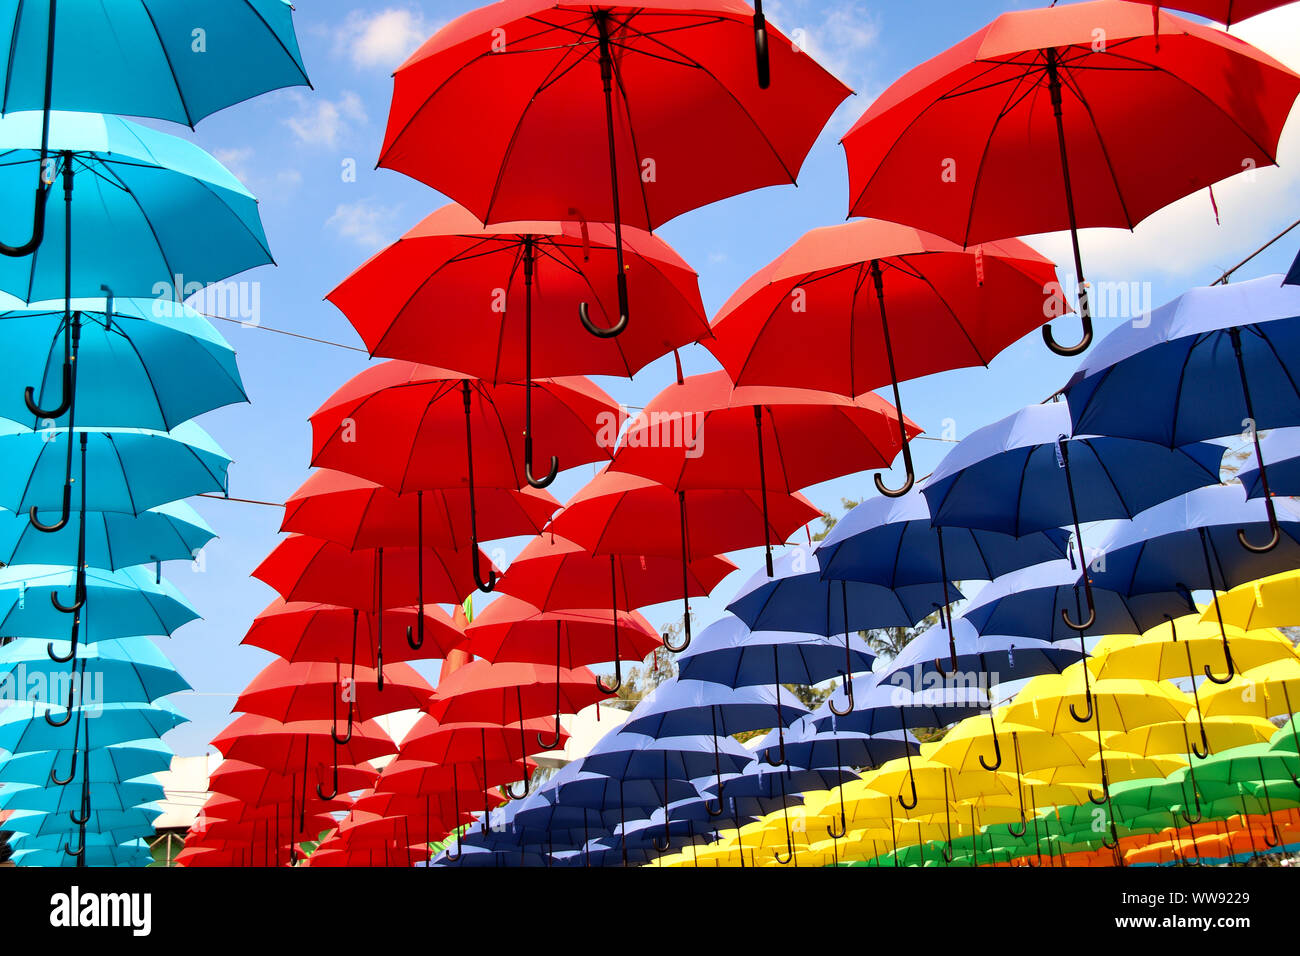 Colorful umbrellas decoration welcoming the summer Stock Photo